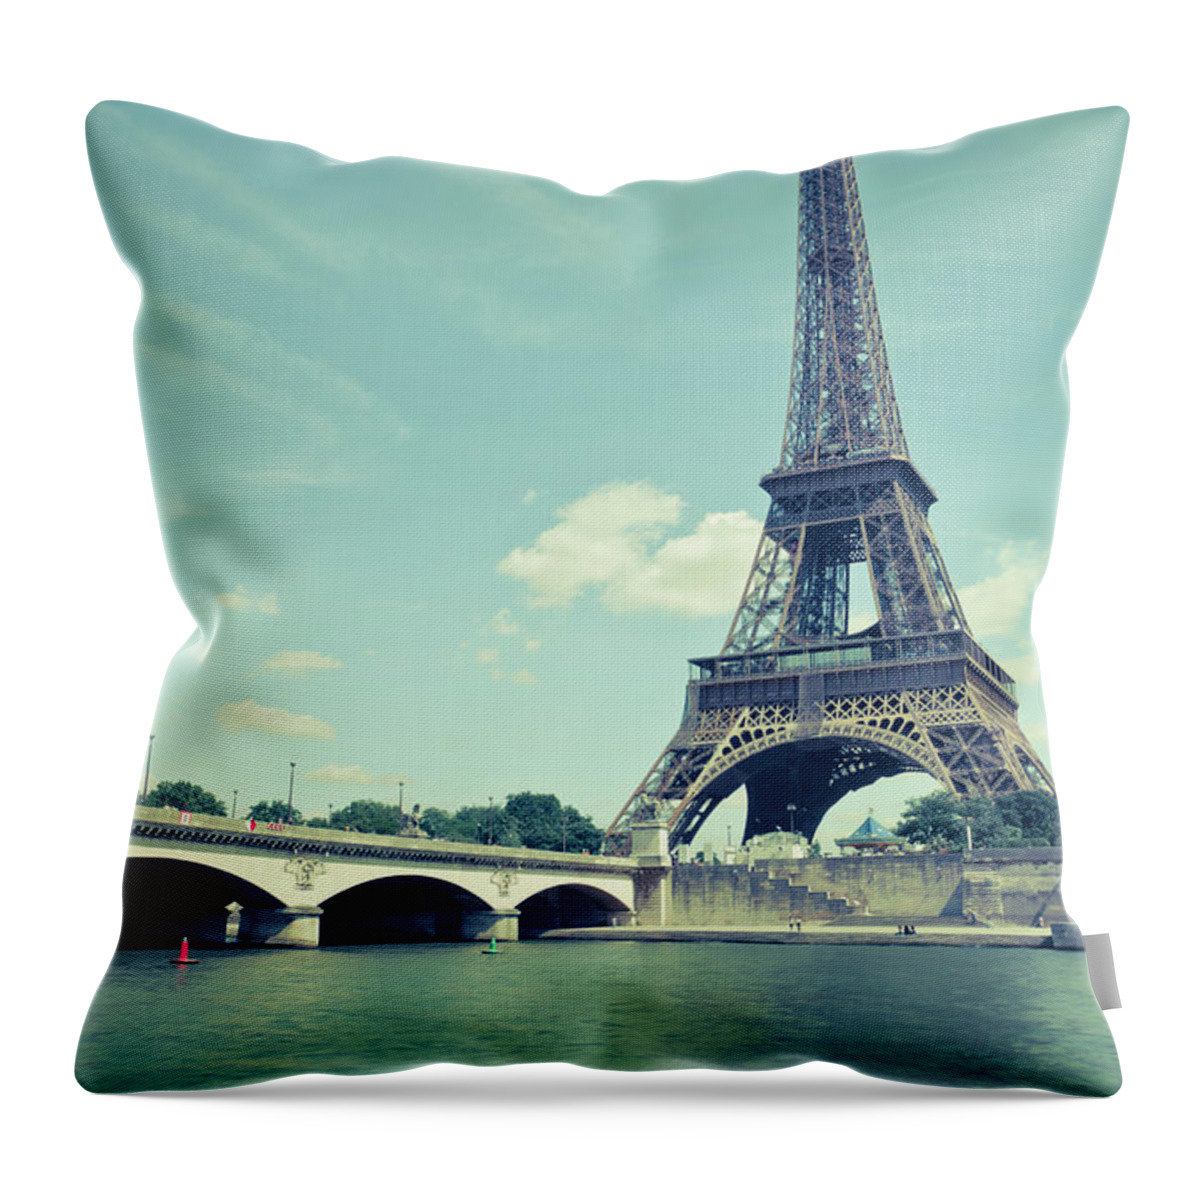 Eiffel Tower Throw Pillow featuring the photograph Eiffel Tower In Retro Pastel Colors by Pawel.gaul